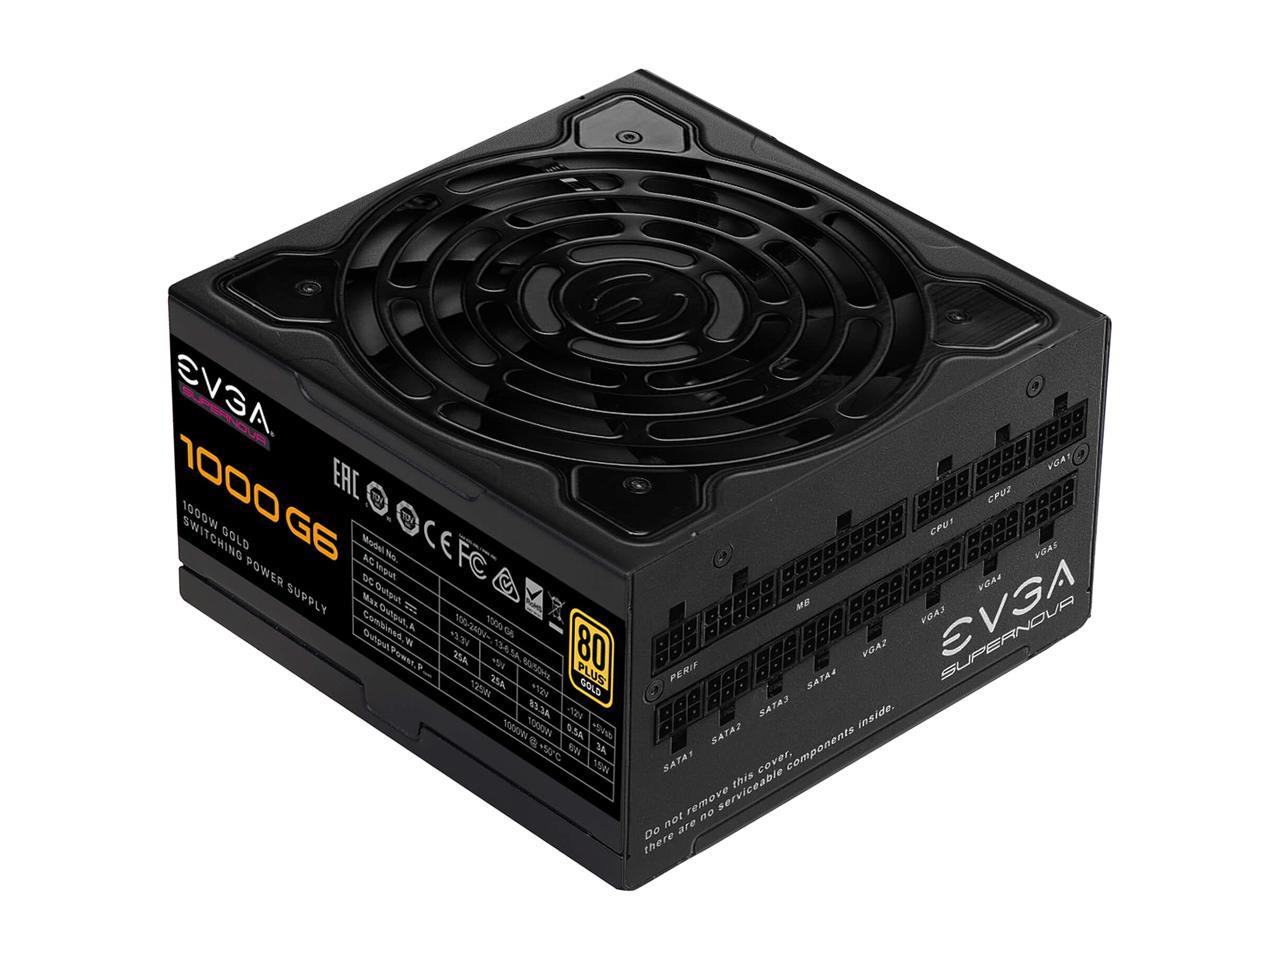 EVGA SuperNOVA 1000 G6, 80 Plus Gold 1000W, Fully Modular, Eco Mode with FDB Fan, 10 Year Warranty, Includes Power ON Self Tester, Compact 140mm Size, Power Supply 220-G6-1000-X1